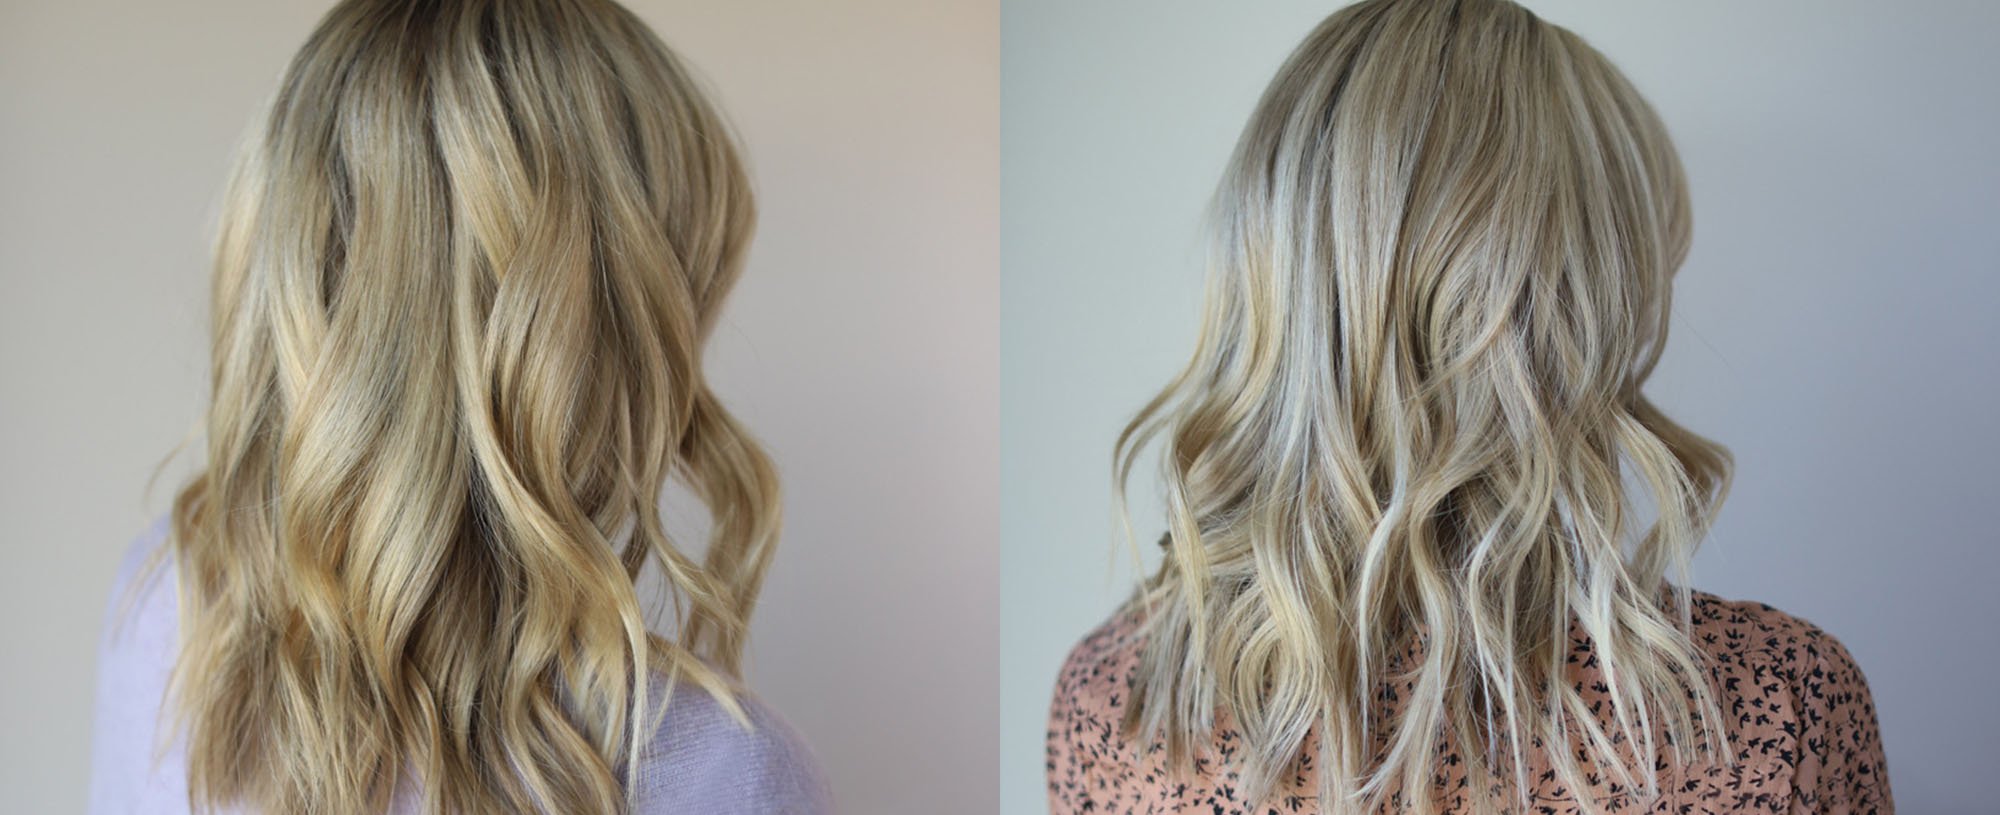 How Does High Lift Hair Color Work?